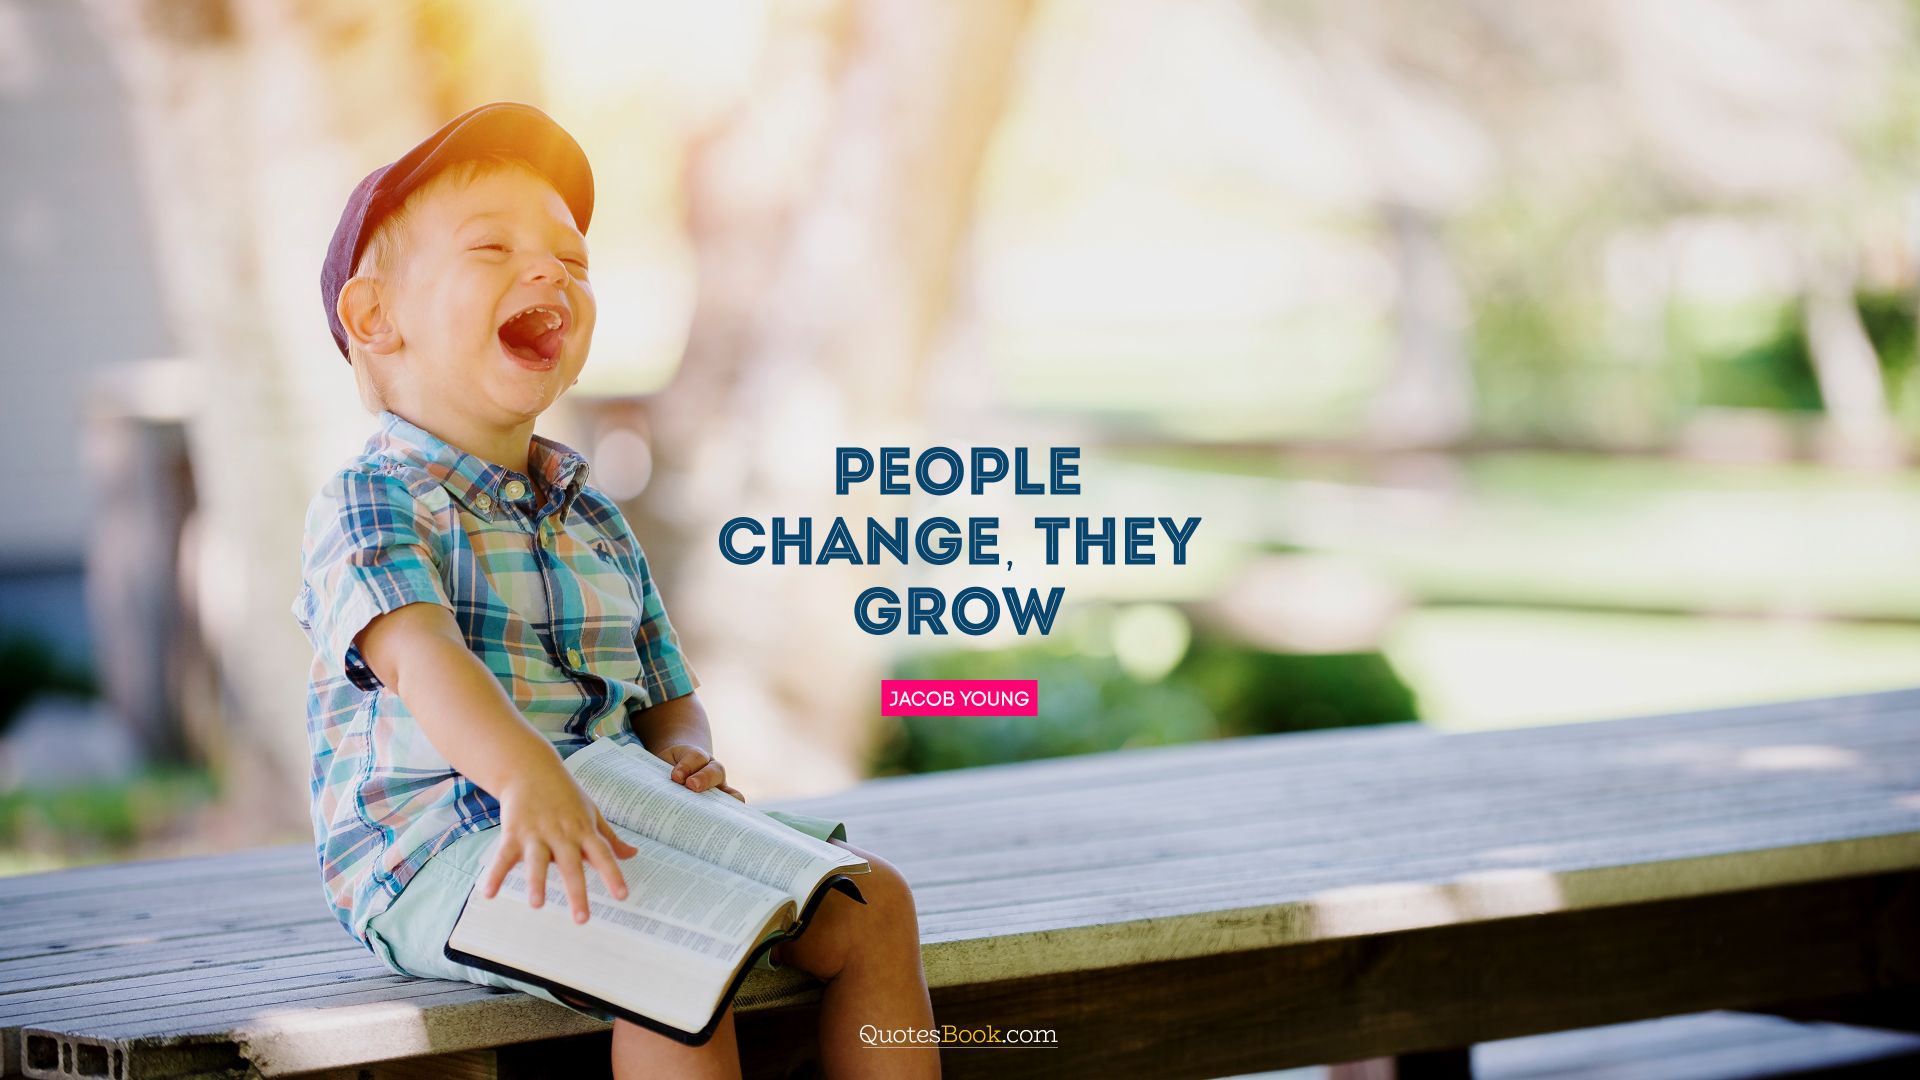 People change, they grow. - Quote by Jacob Young